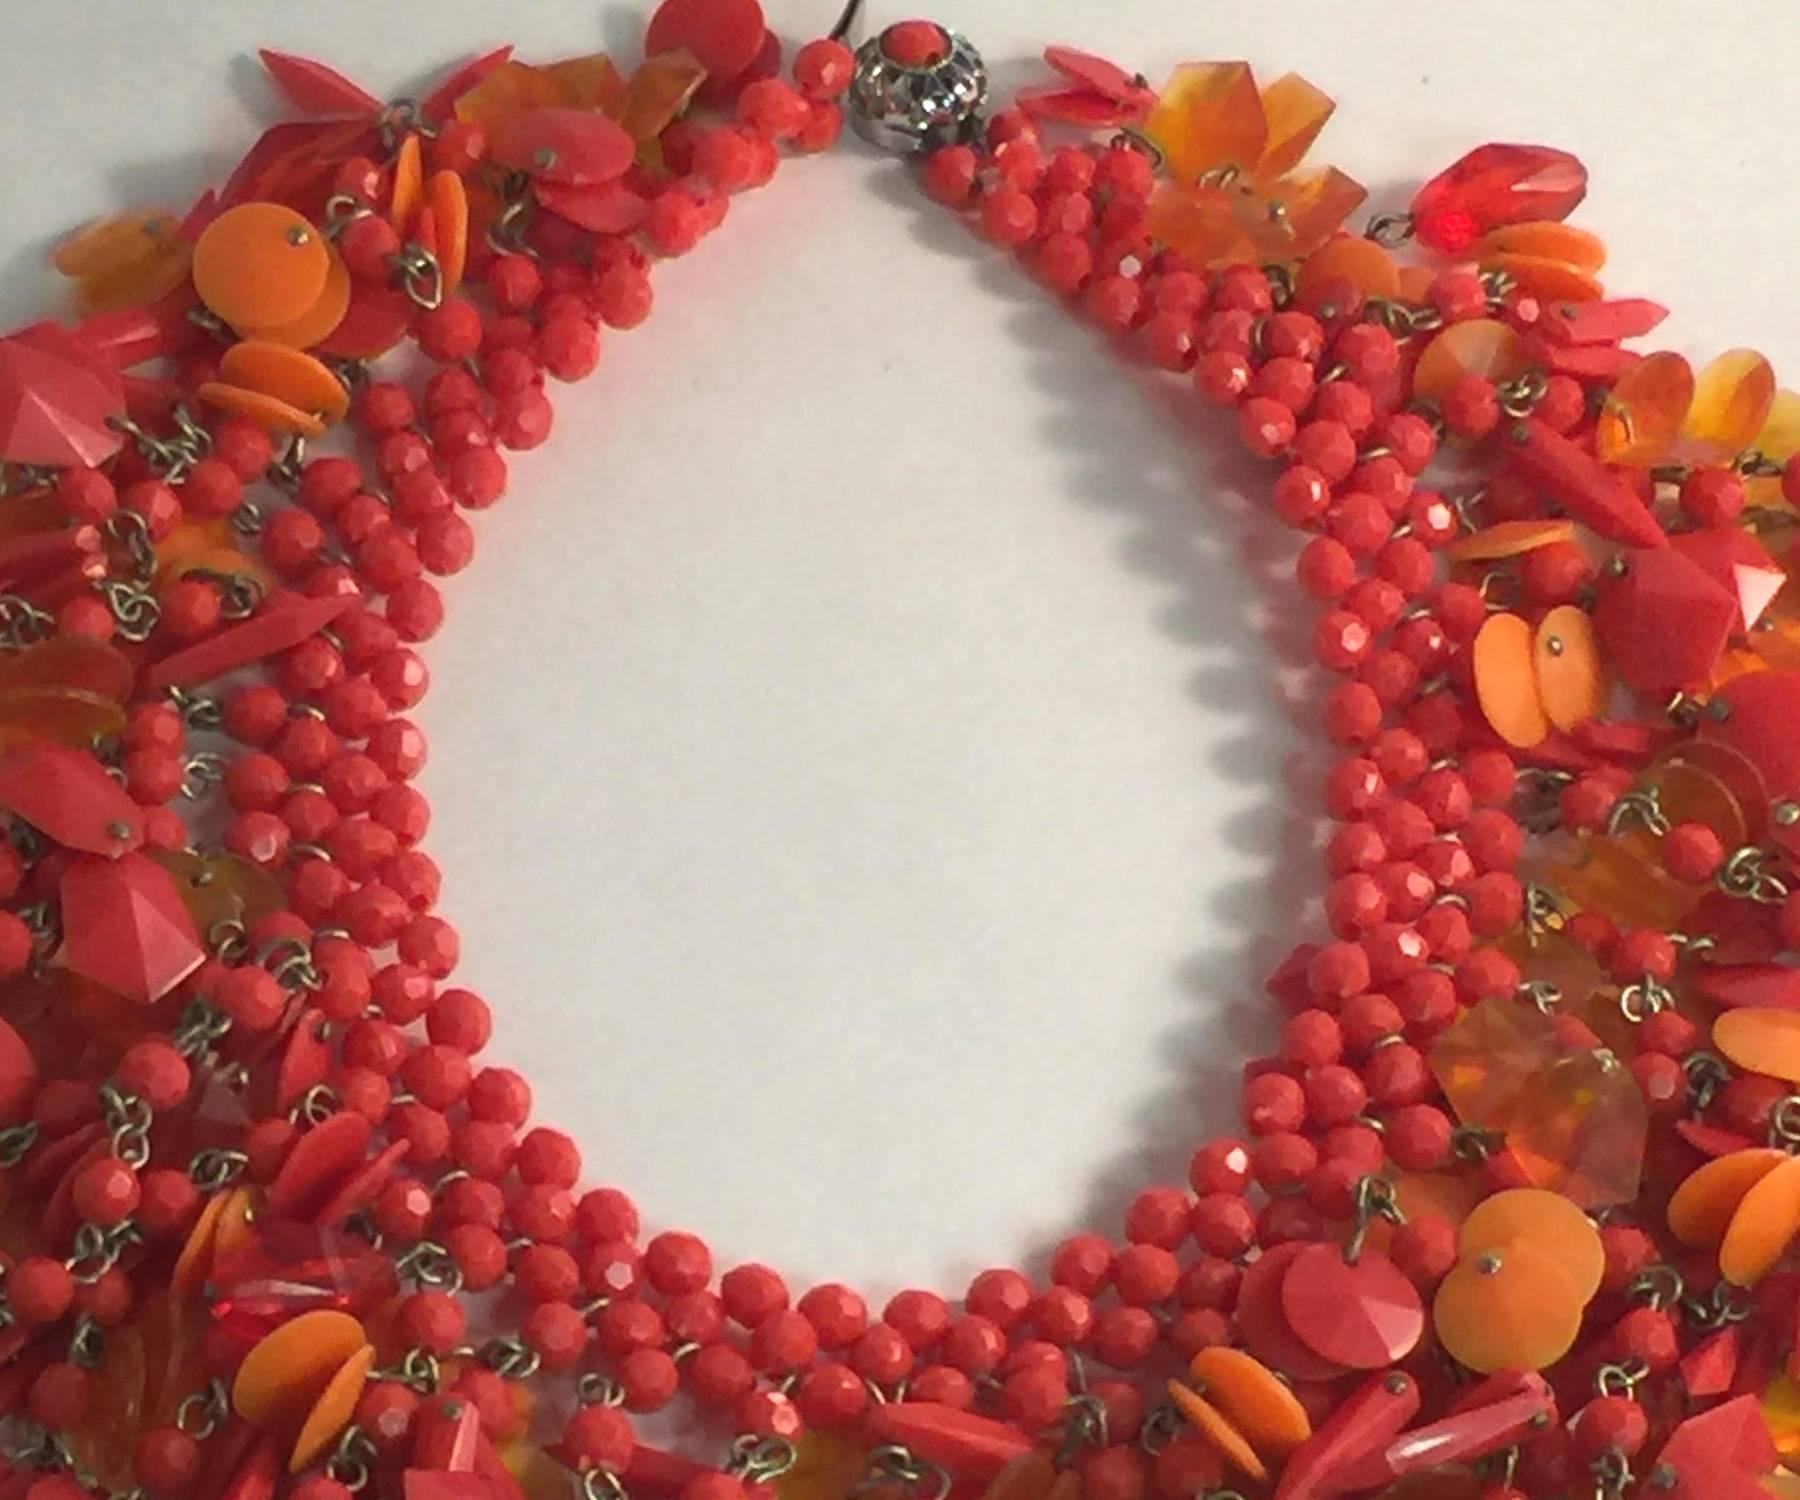 Definitively the finest West German acetate and plastic necklace EVER--this unsigned beauty bears all the hallmarks of West German fun fabulous costume jewelry style of the 1960s. Crocheted like the iconic Coppolla di Toppo 1960s Italian sought